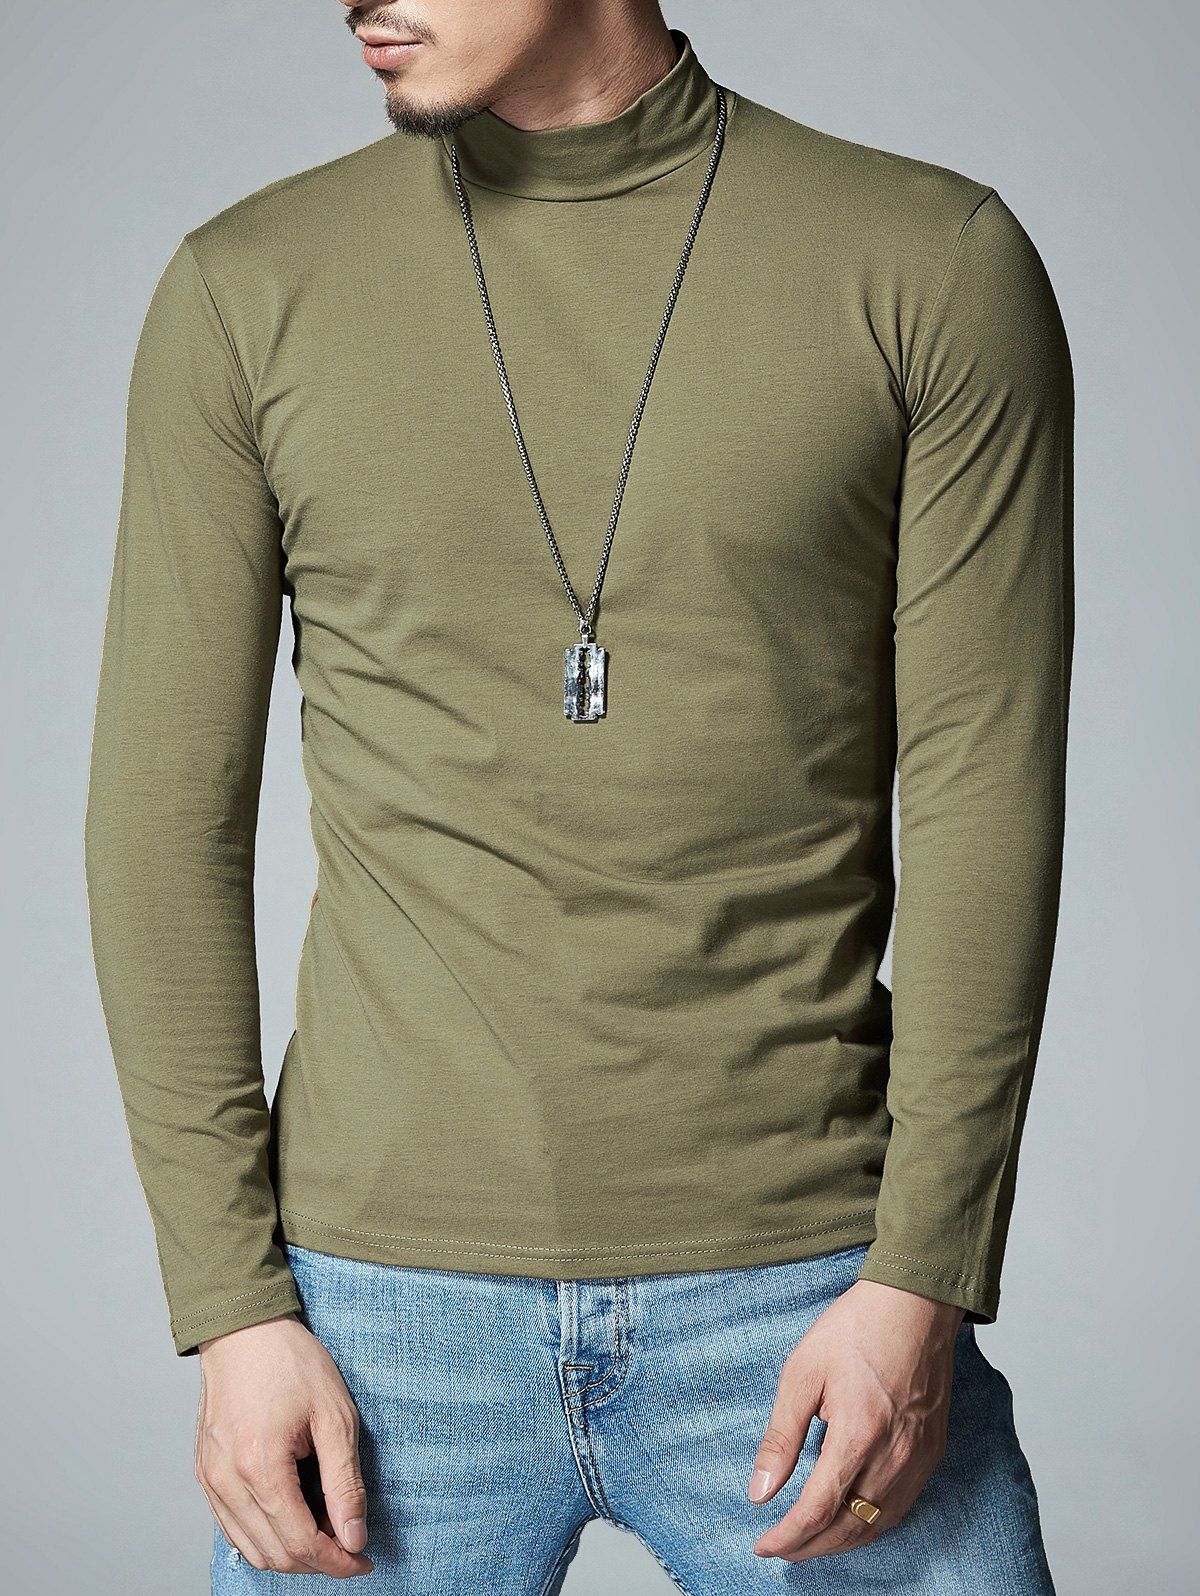 Download 17% OFF 2020 Stretch Mock Neck Long Sleeve T-shirt In ...